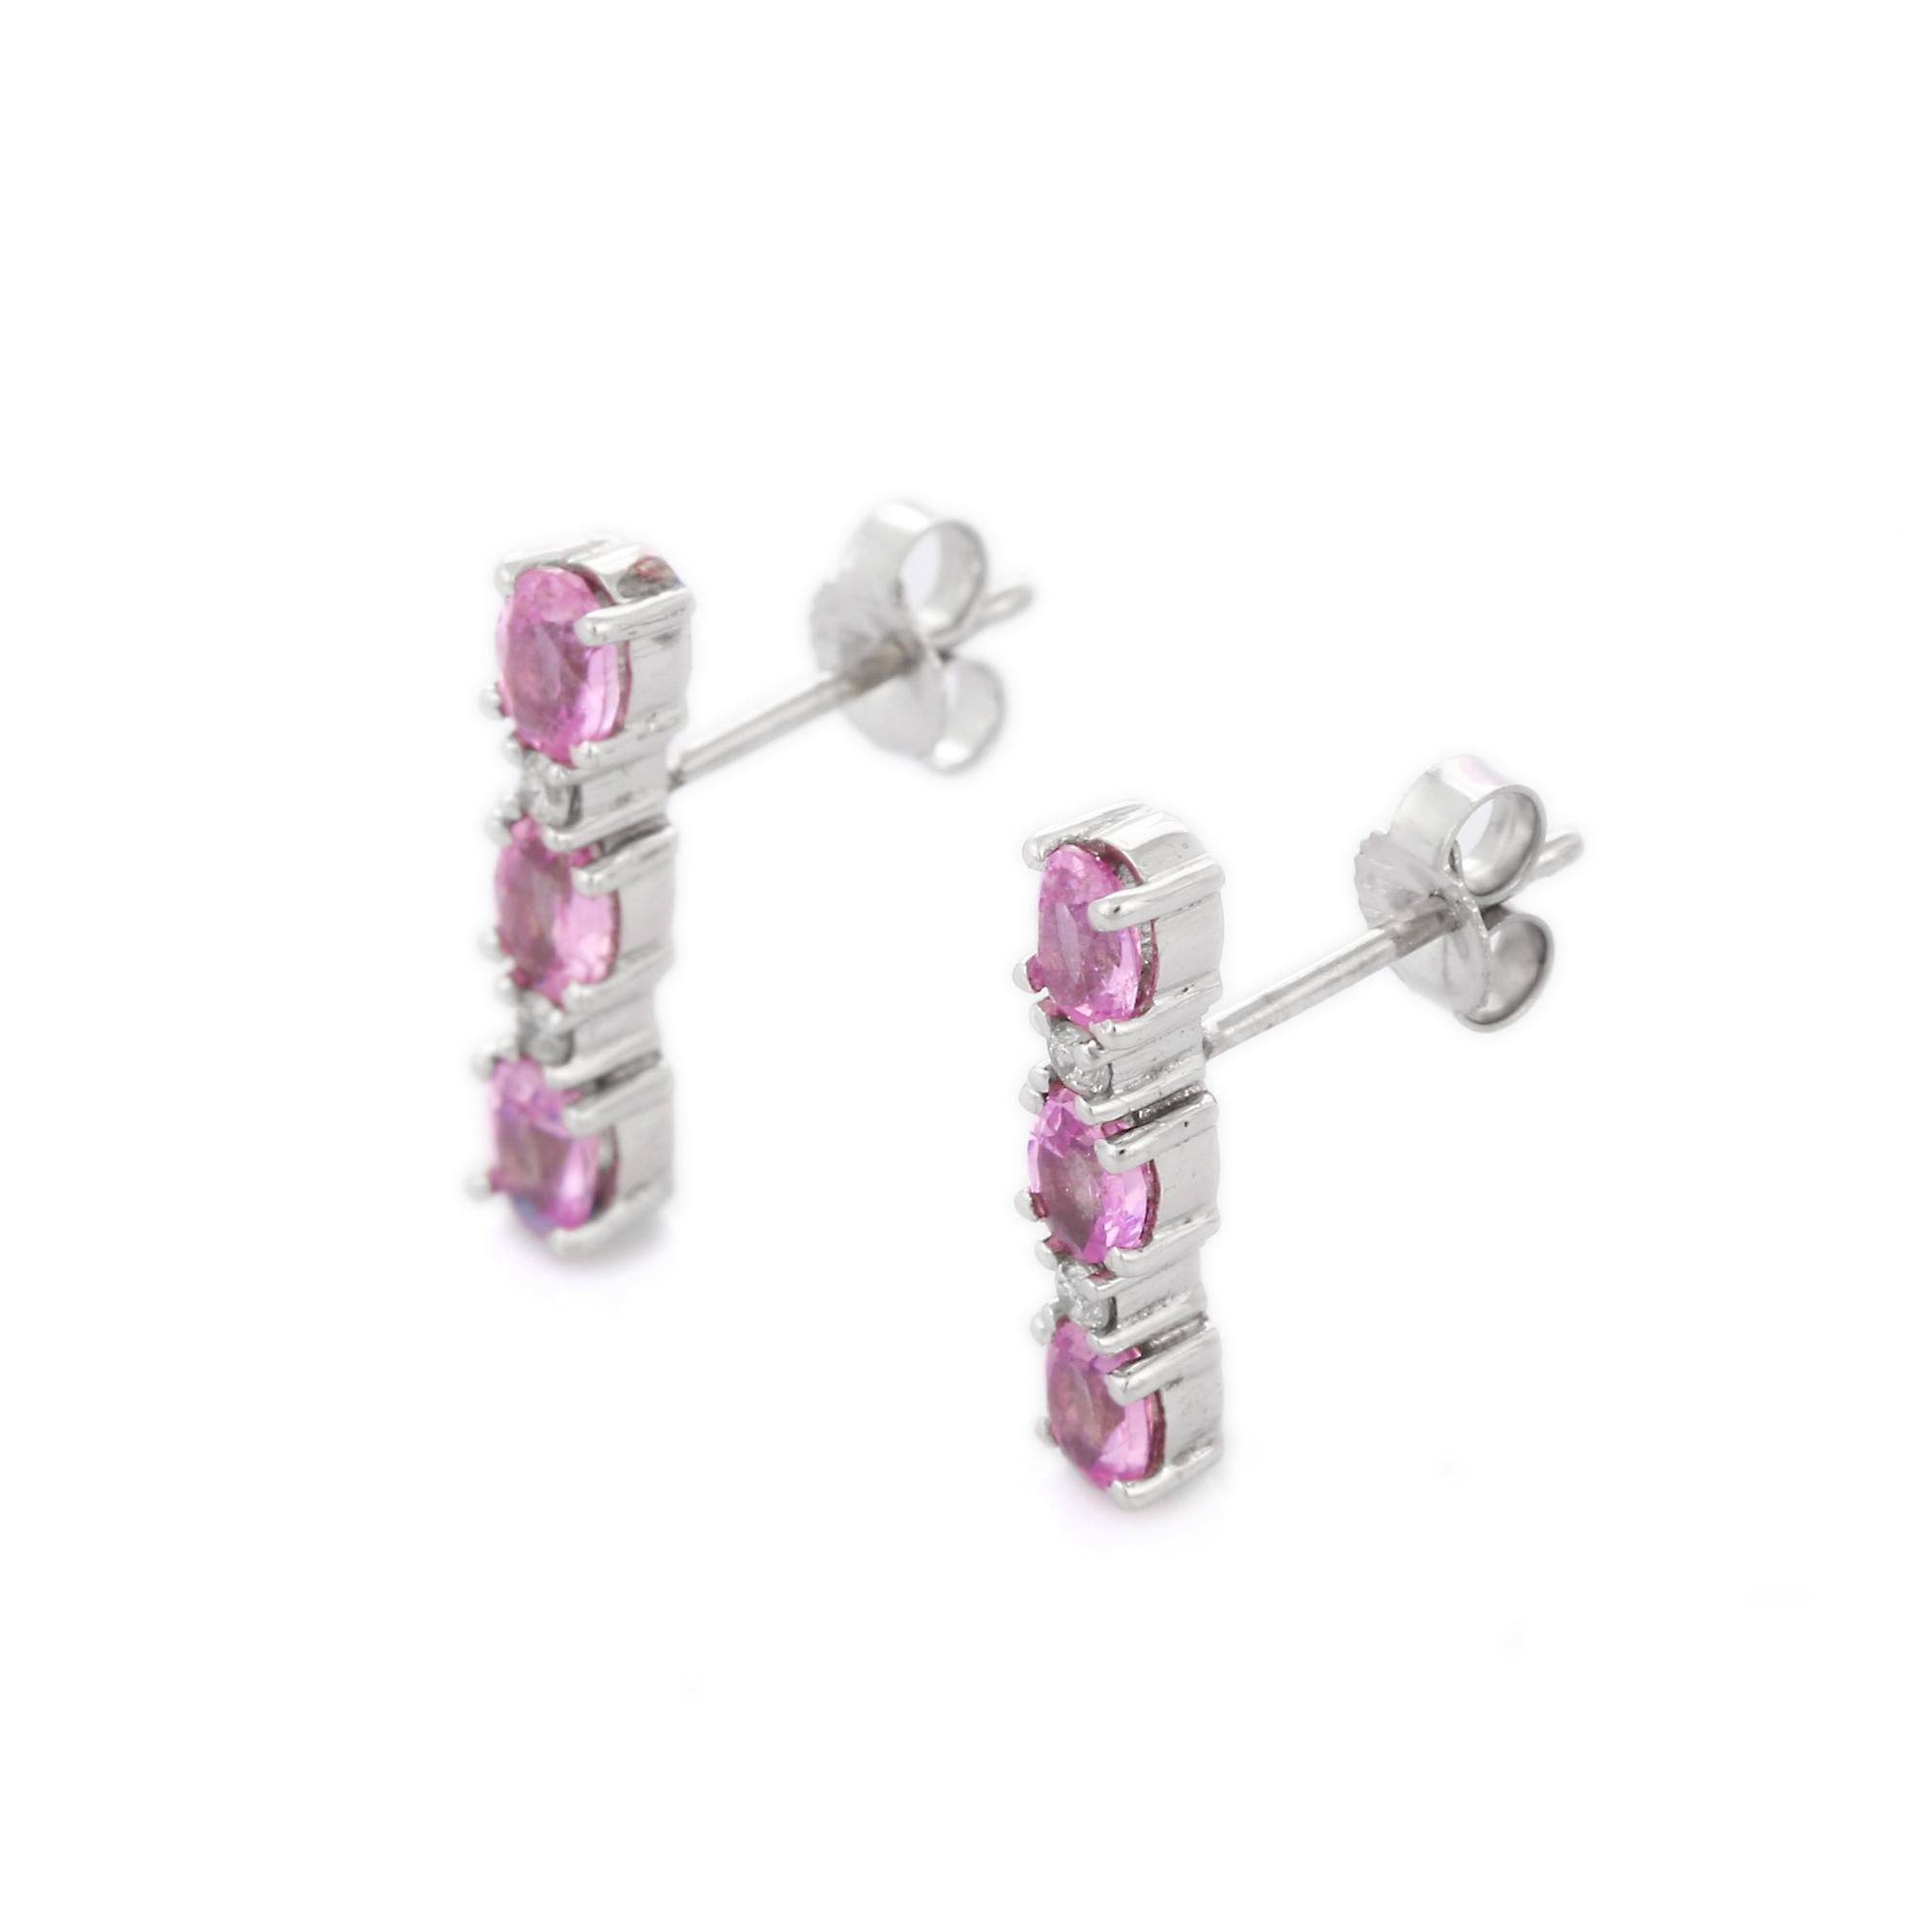 Pink Sapphire Dangle earrings to make a statement with your look. These earrings create a sparkling, luxurious look featuring oval cut gemstone.
If you love to gravitate towards unique styles, this piece of jewelry is perfect for you.

PRODUCT